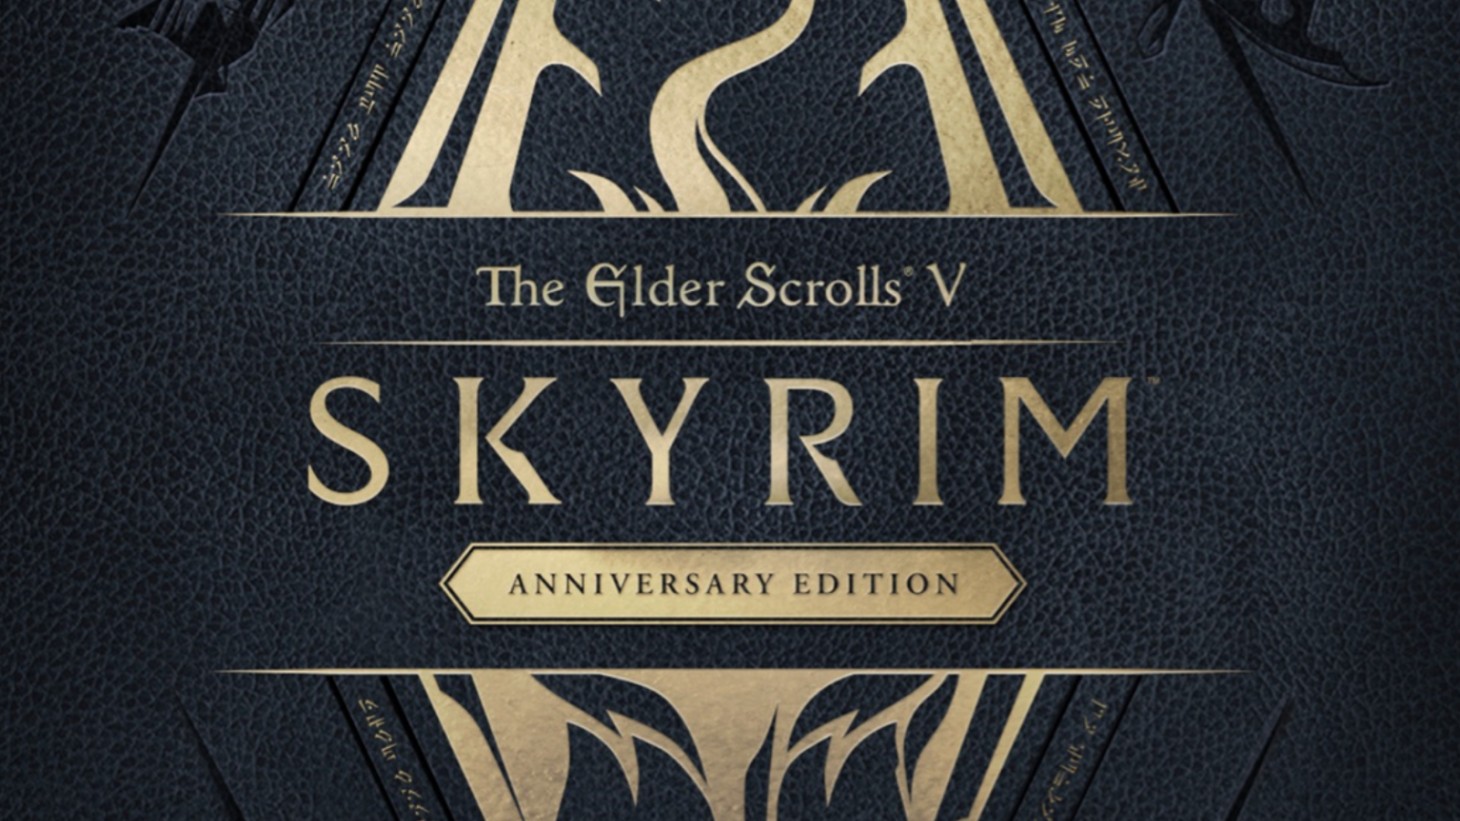 Skyrim Anniversary Edition Price Revealed Alongside Upgrade Path Option For  Special Edition Owners - Game Informer